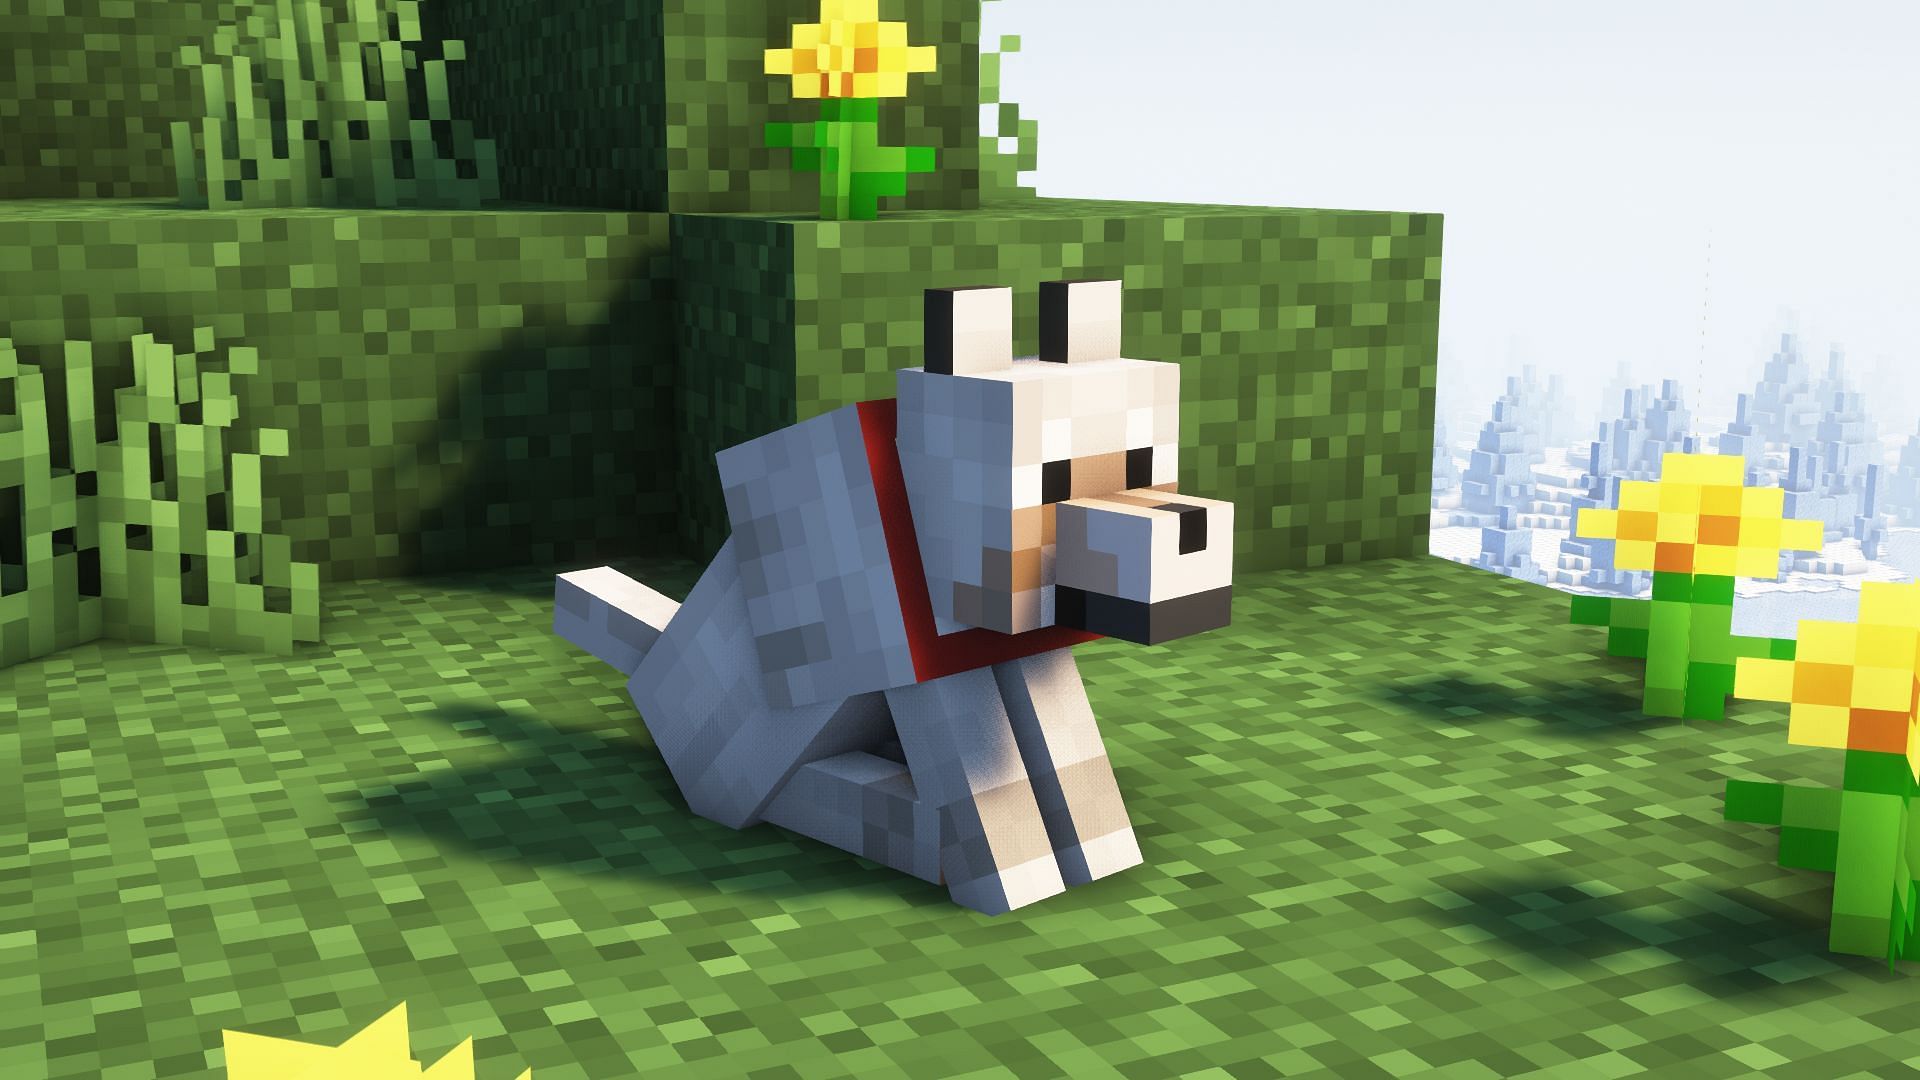 A tamed wolf in Minecraft (Image via Mojang)